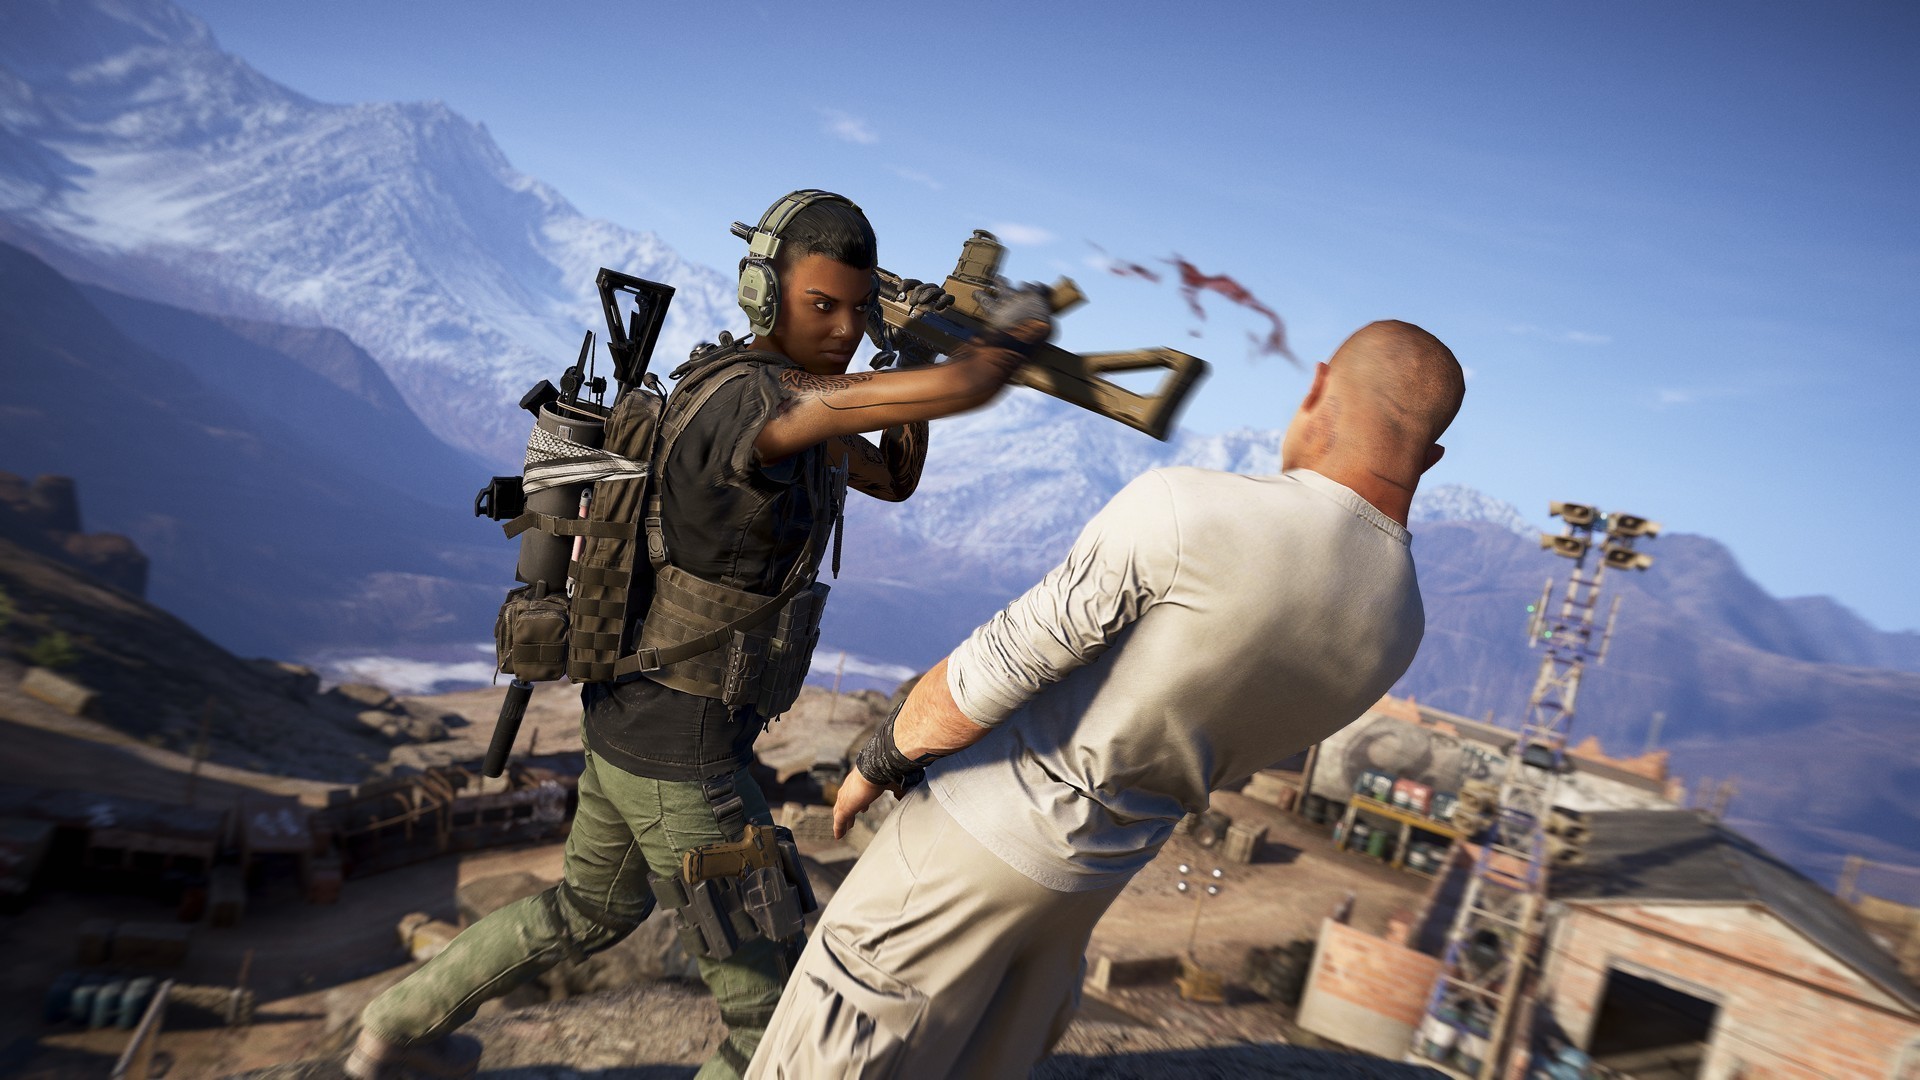 ghost recon wildlands download while playing uplay